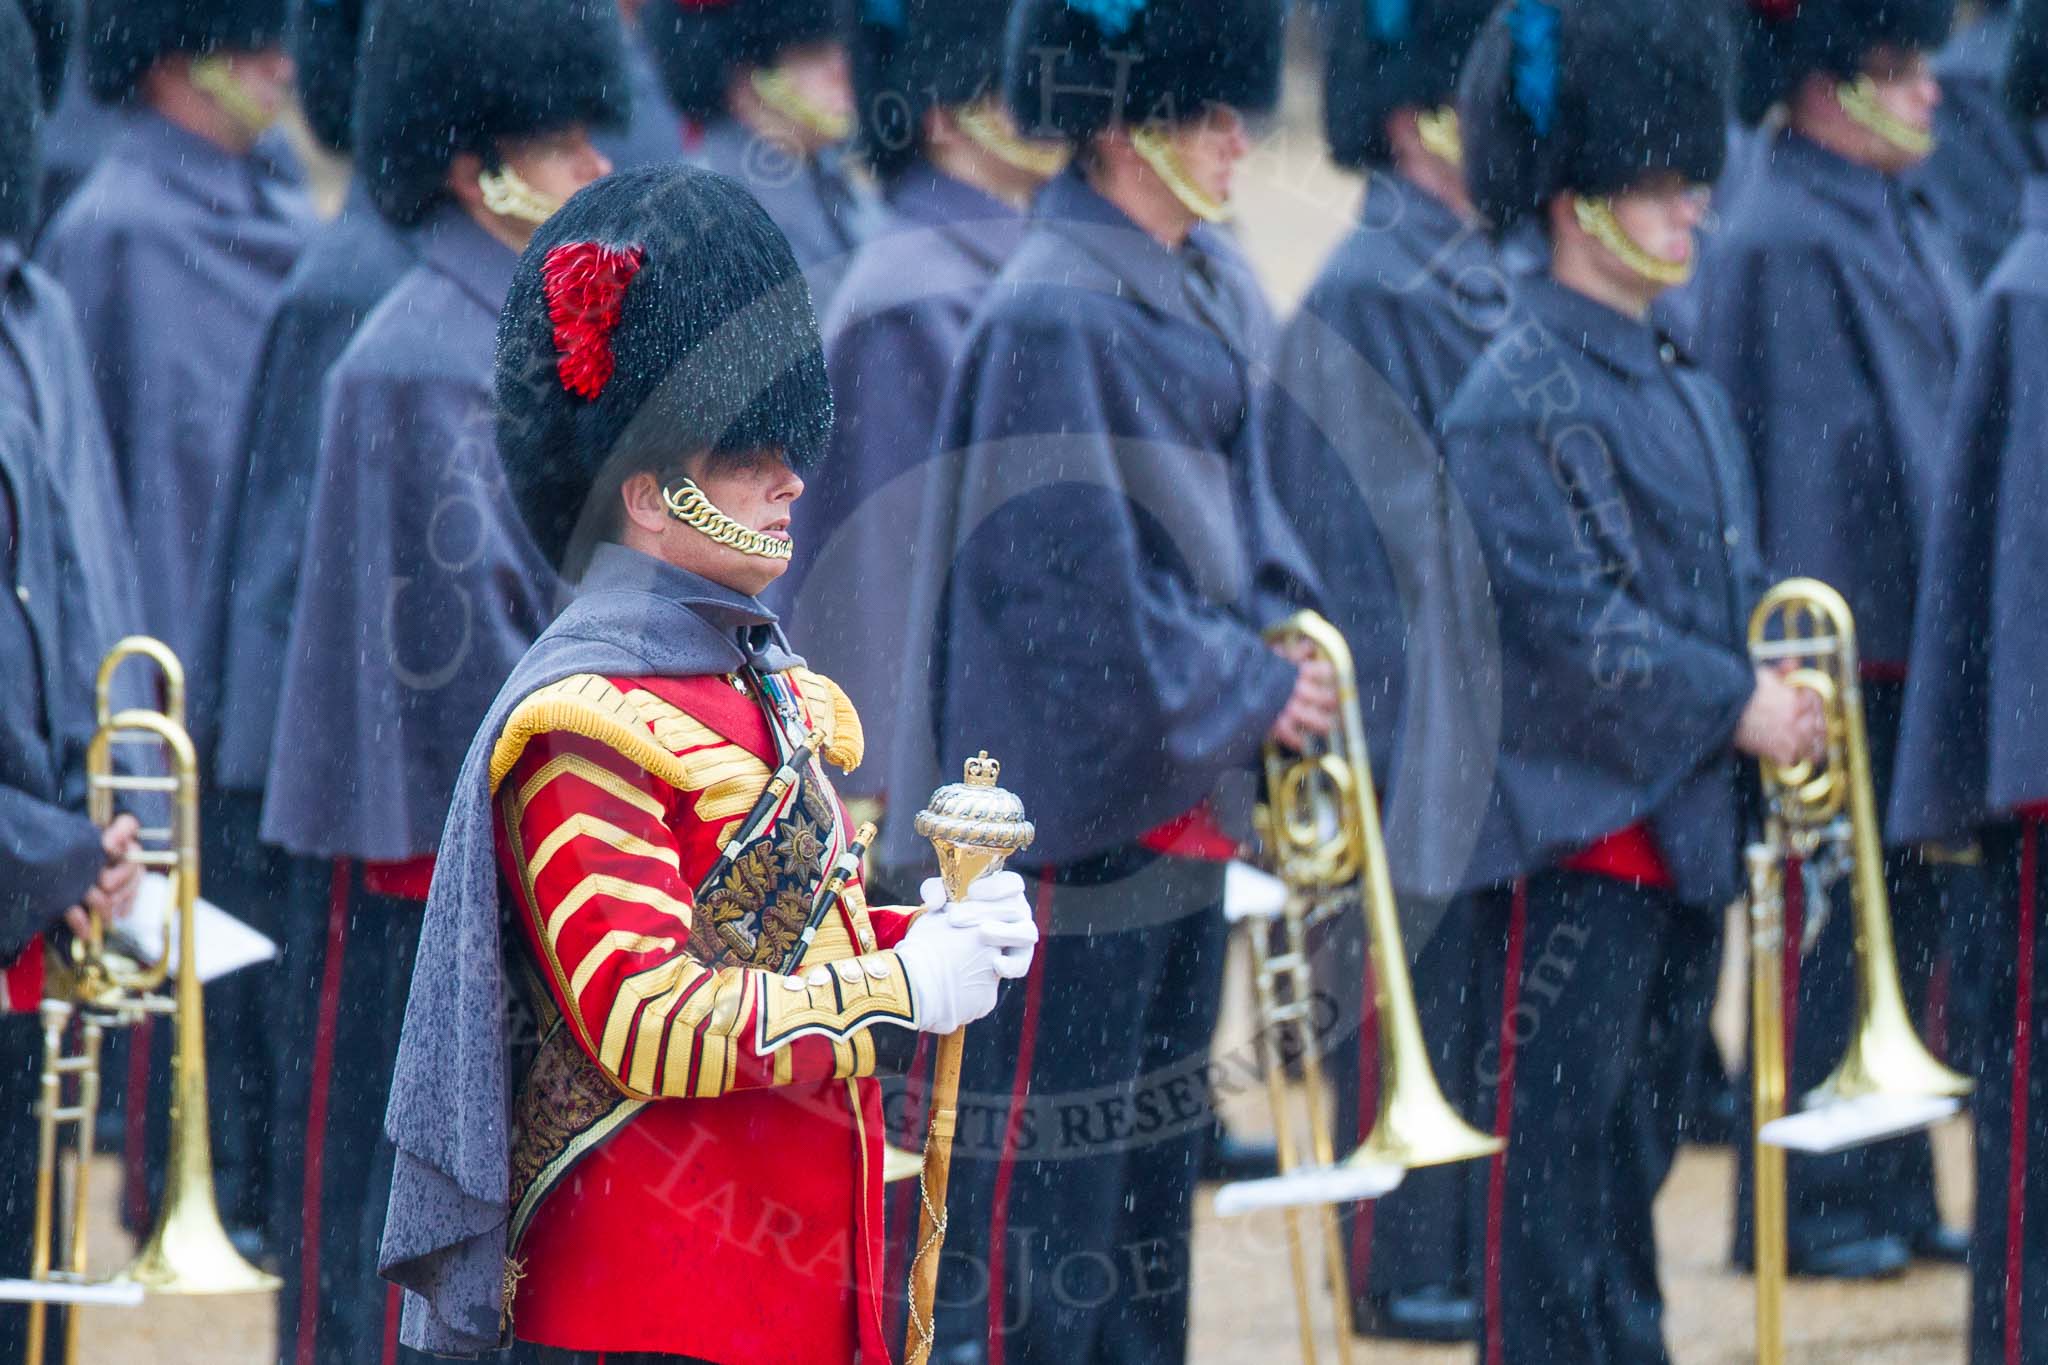 The Colonel's Review 2014.
Horse Guards Parade, Westminster,
London,

United Kingdom,
on 07 June 2014 at 10:22, image #106